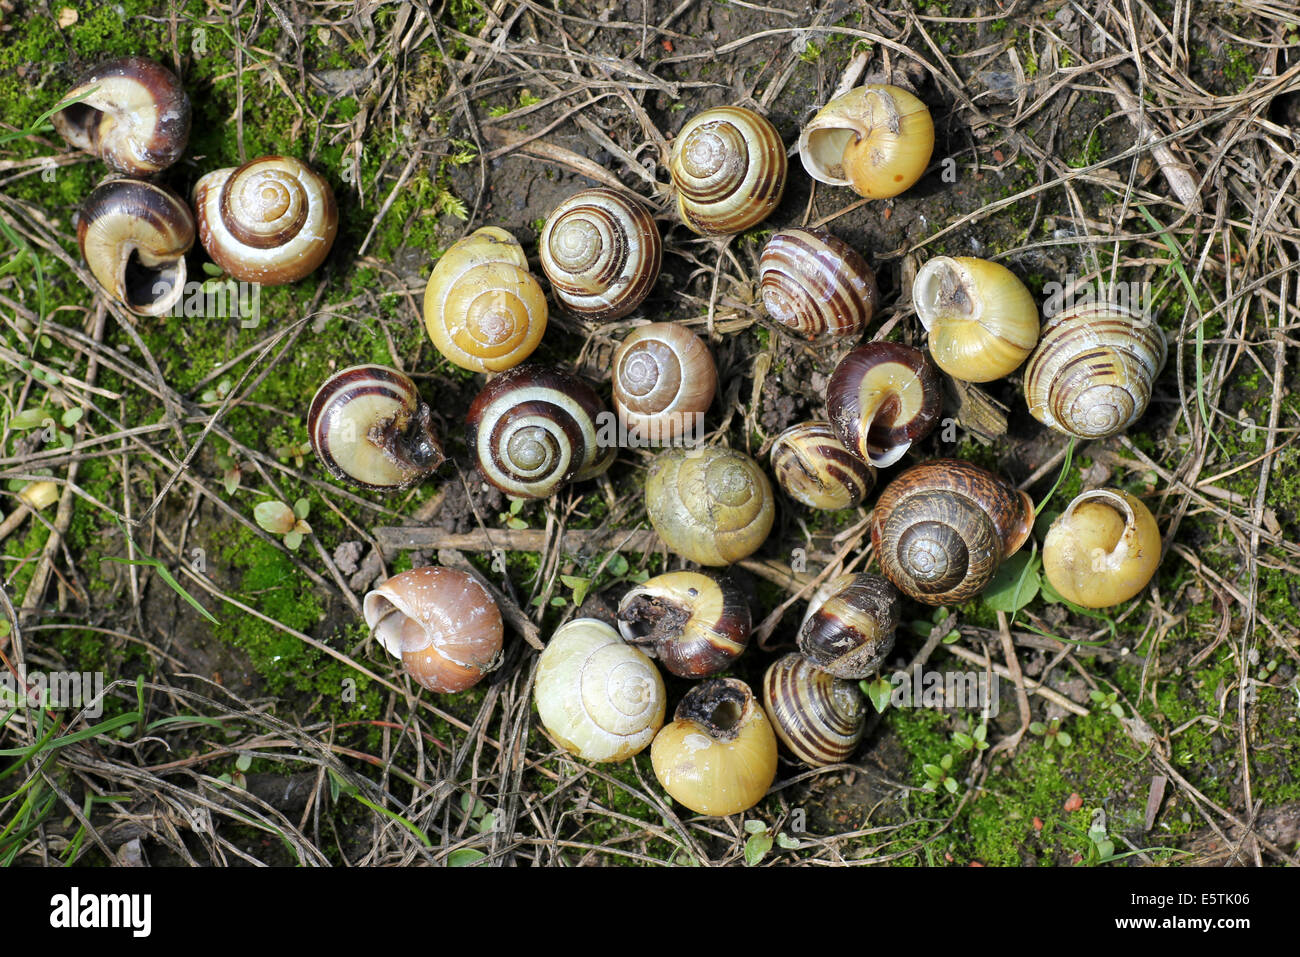 Empty Shells Of White-lipped Banded Snail Cepaea hortensis Eaten By A Song Thrush Turdus philomelos Stock Photo